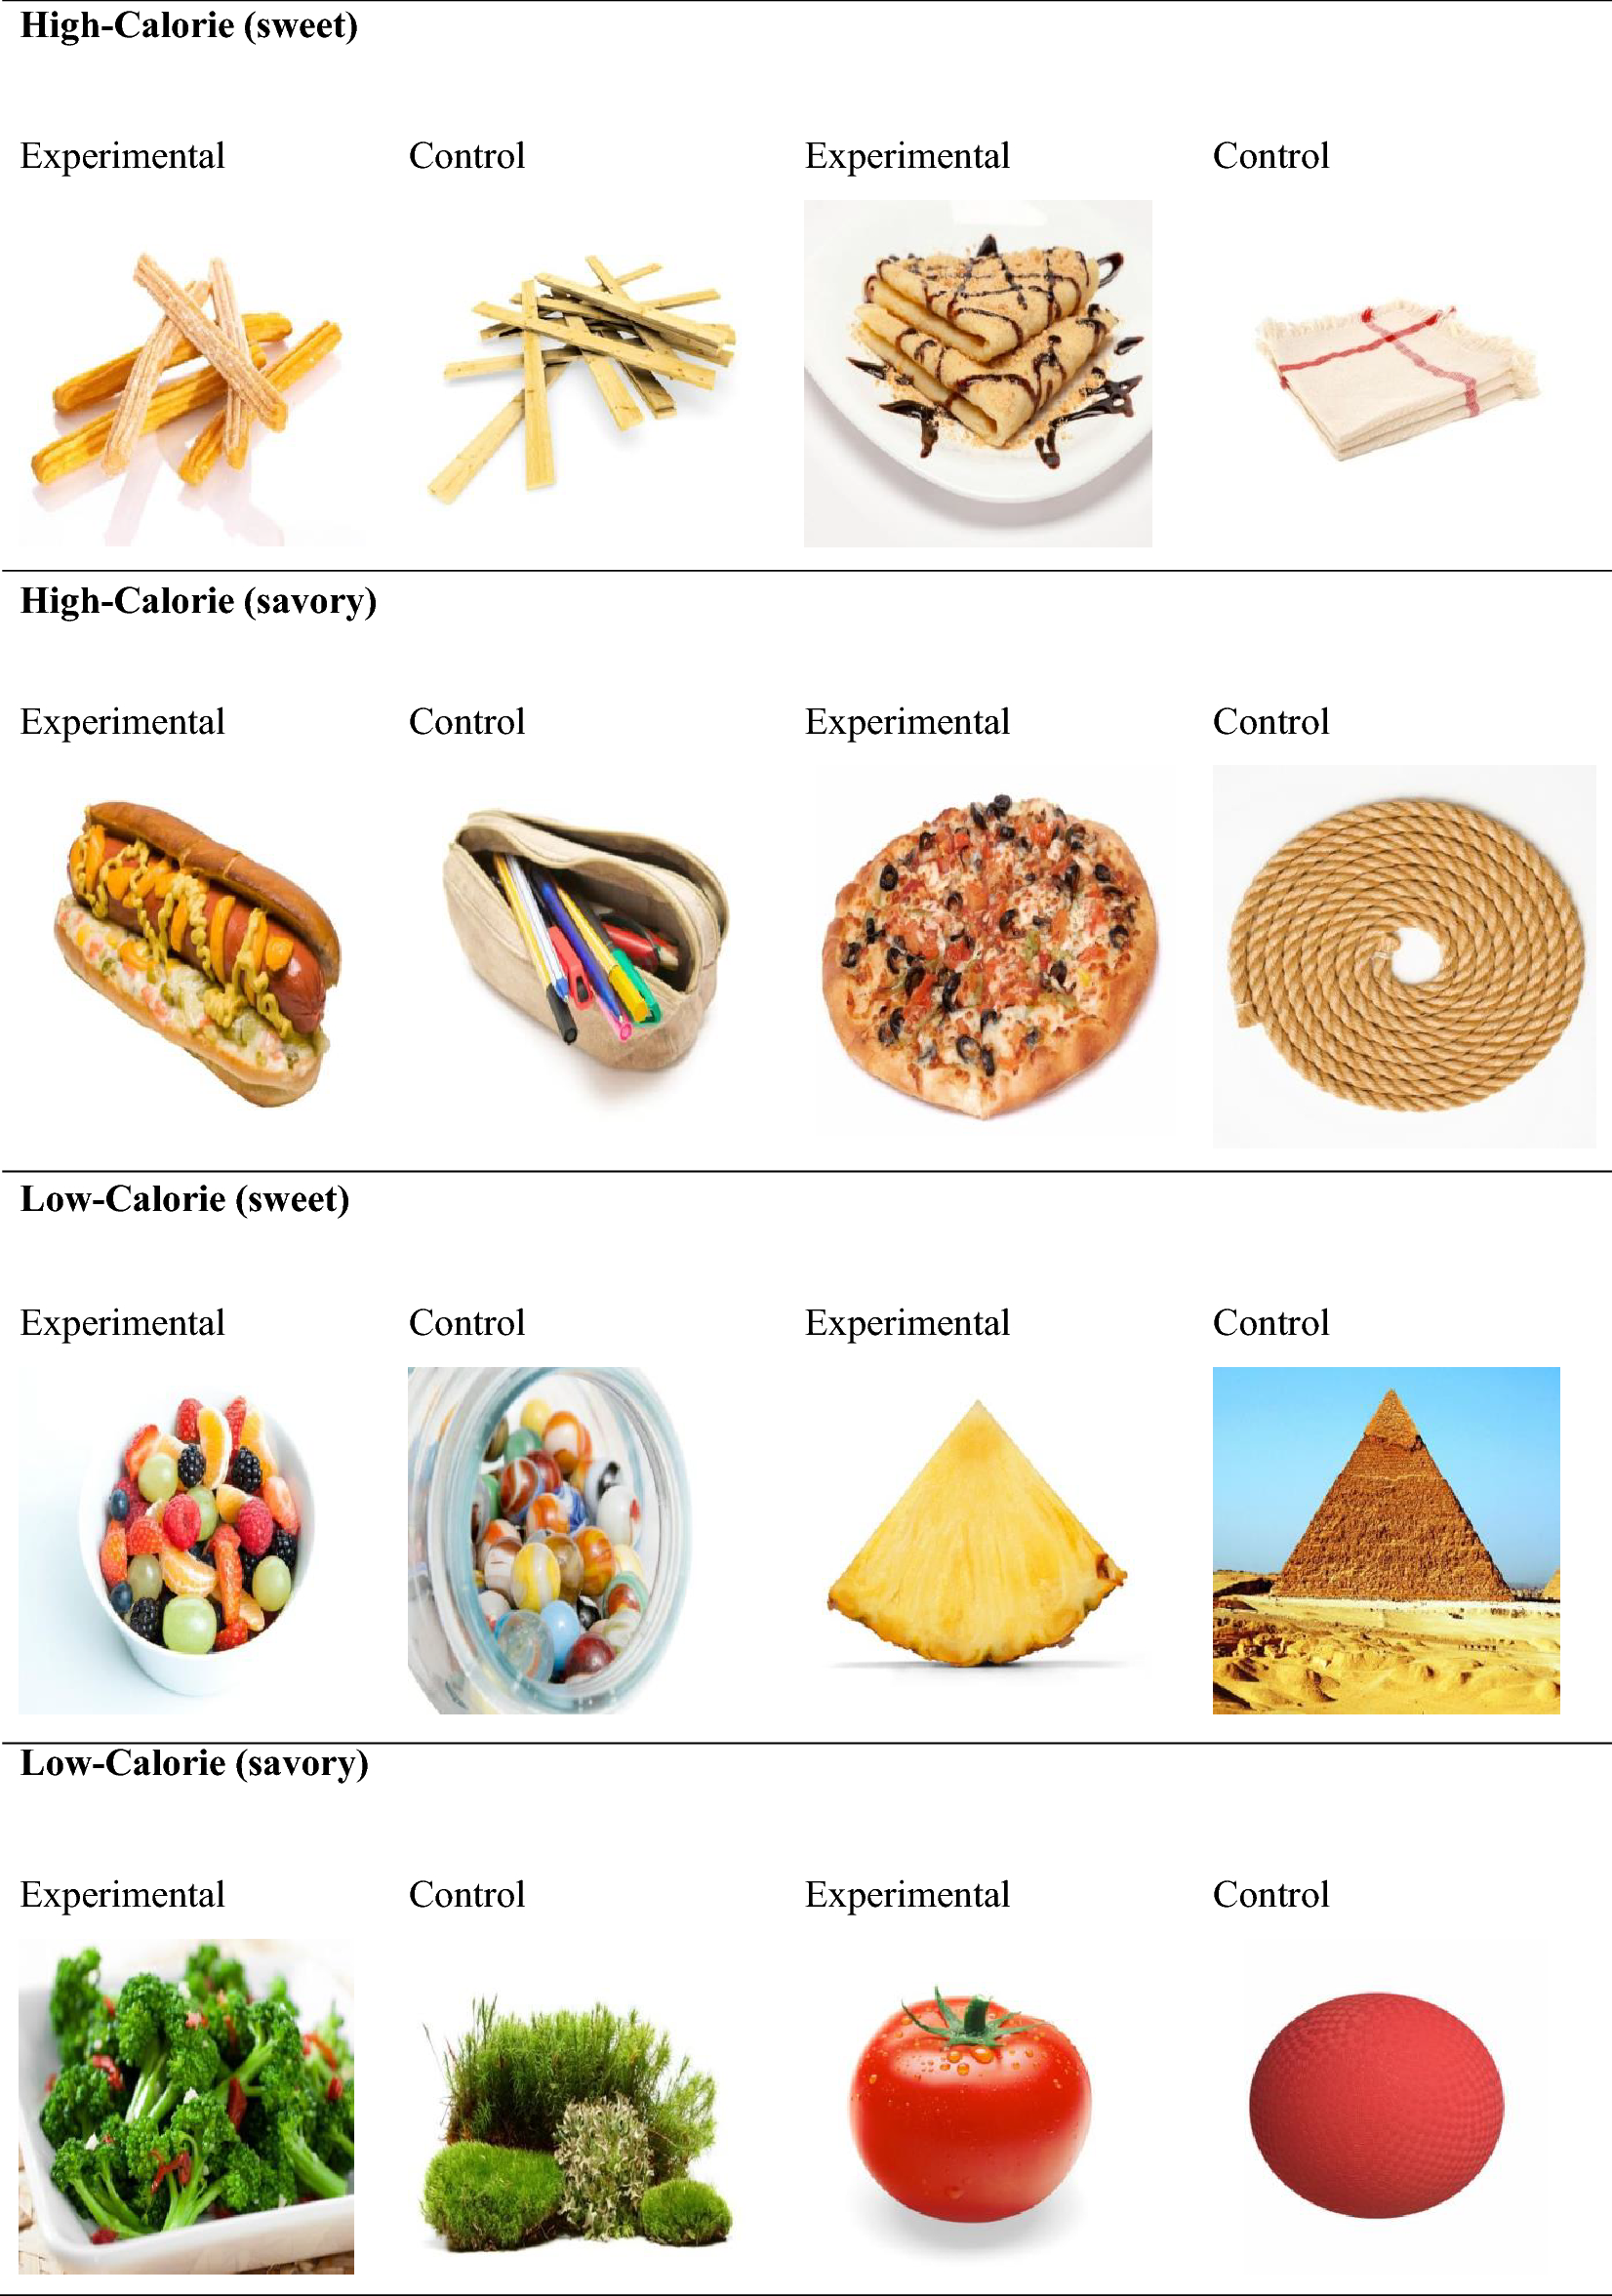 Personalizing Low-Calorie Diets for Different Groups